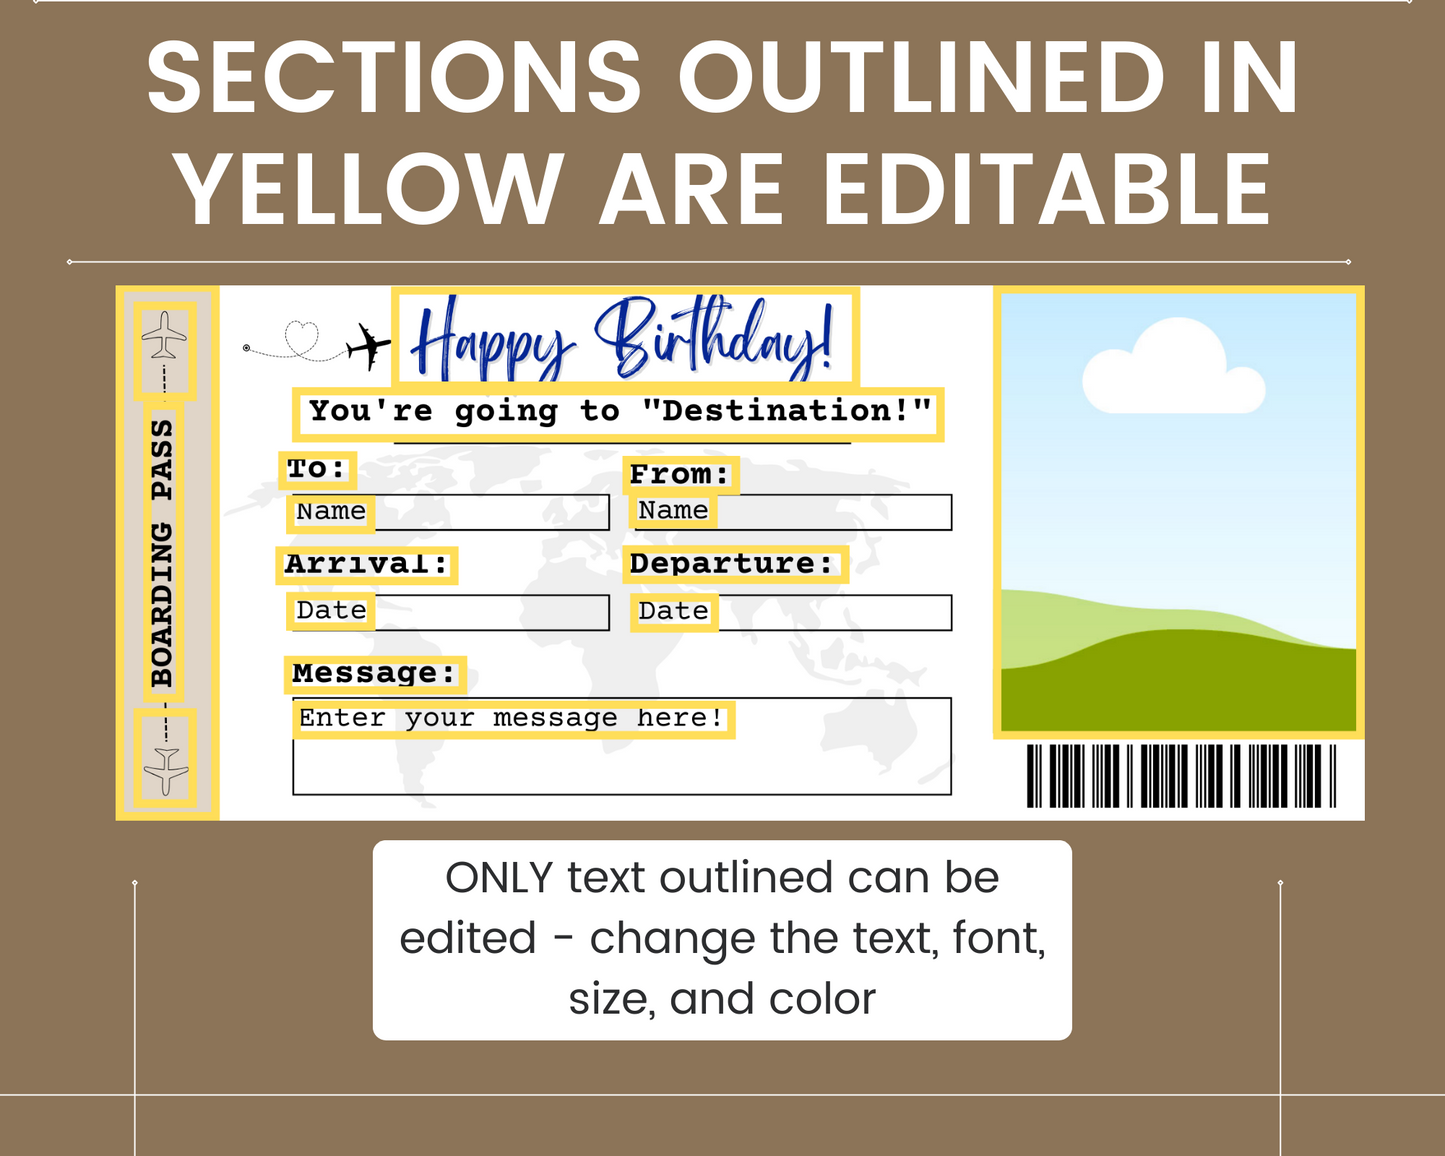 Birthday Boarding Pass: Add your own picture!